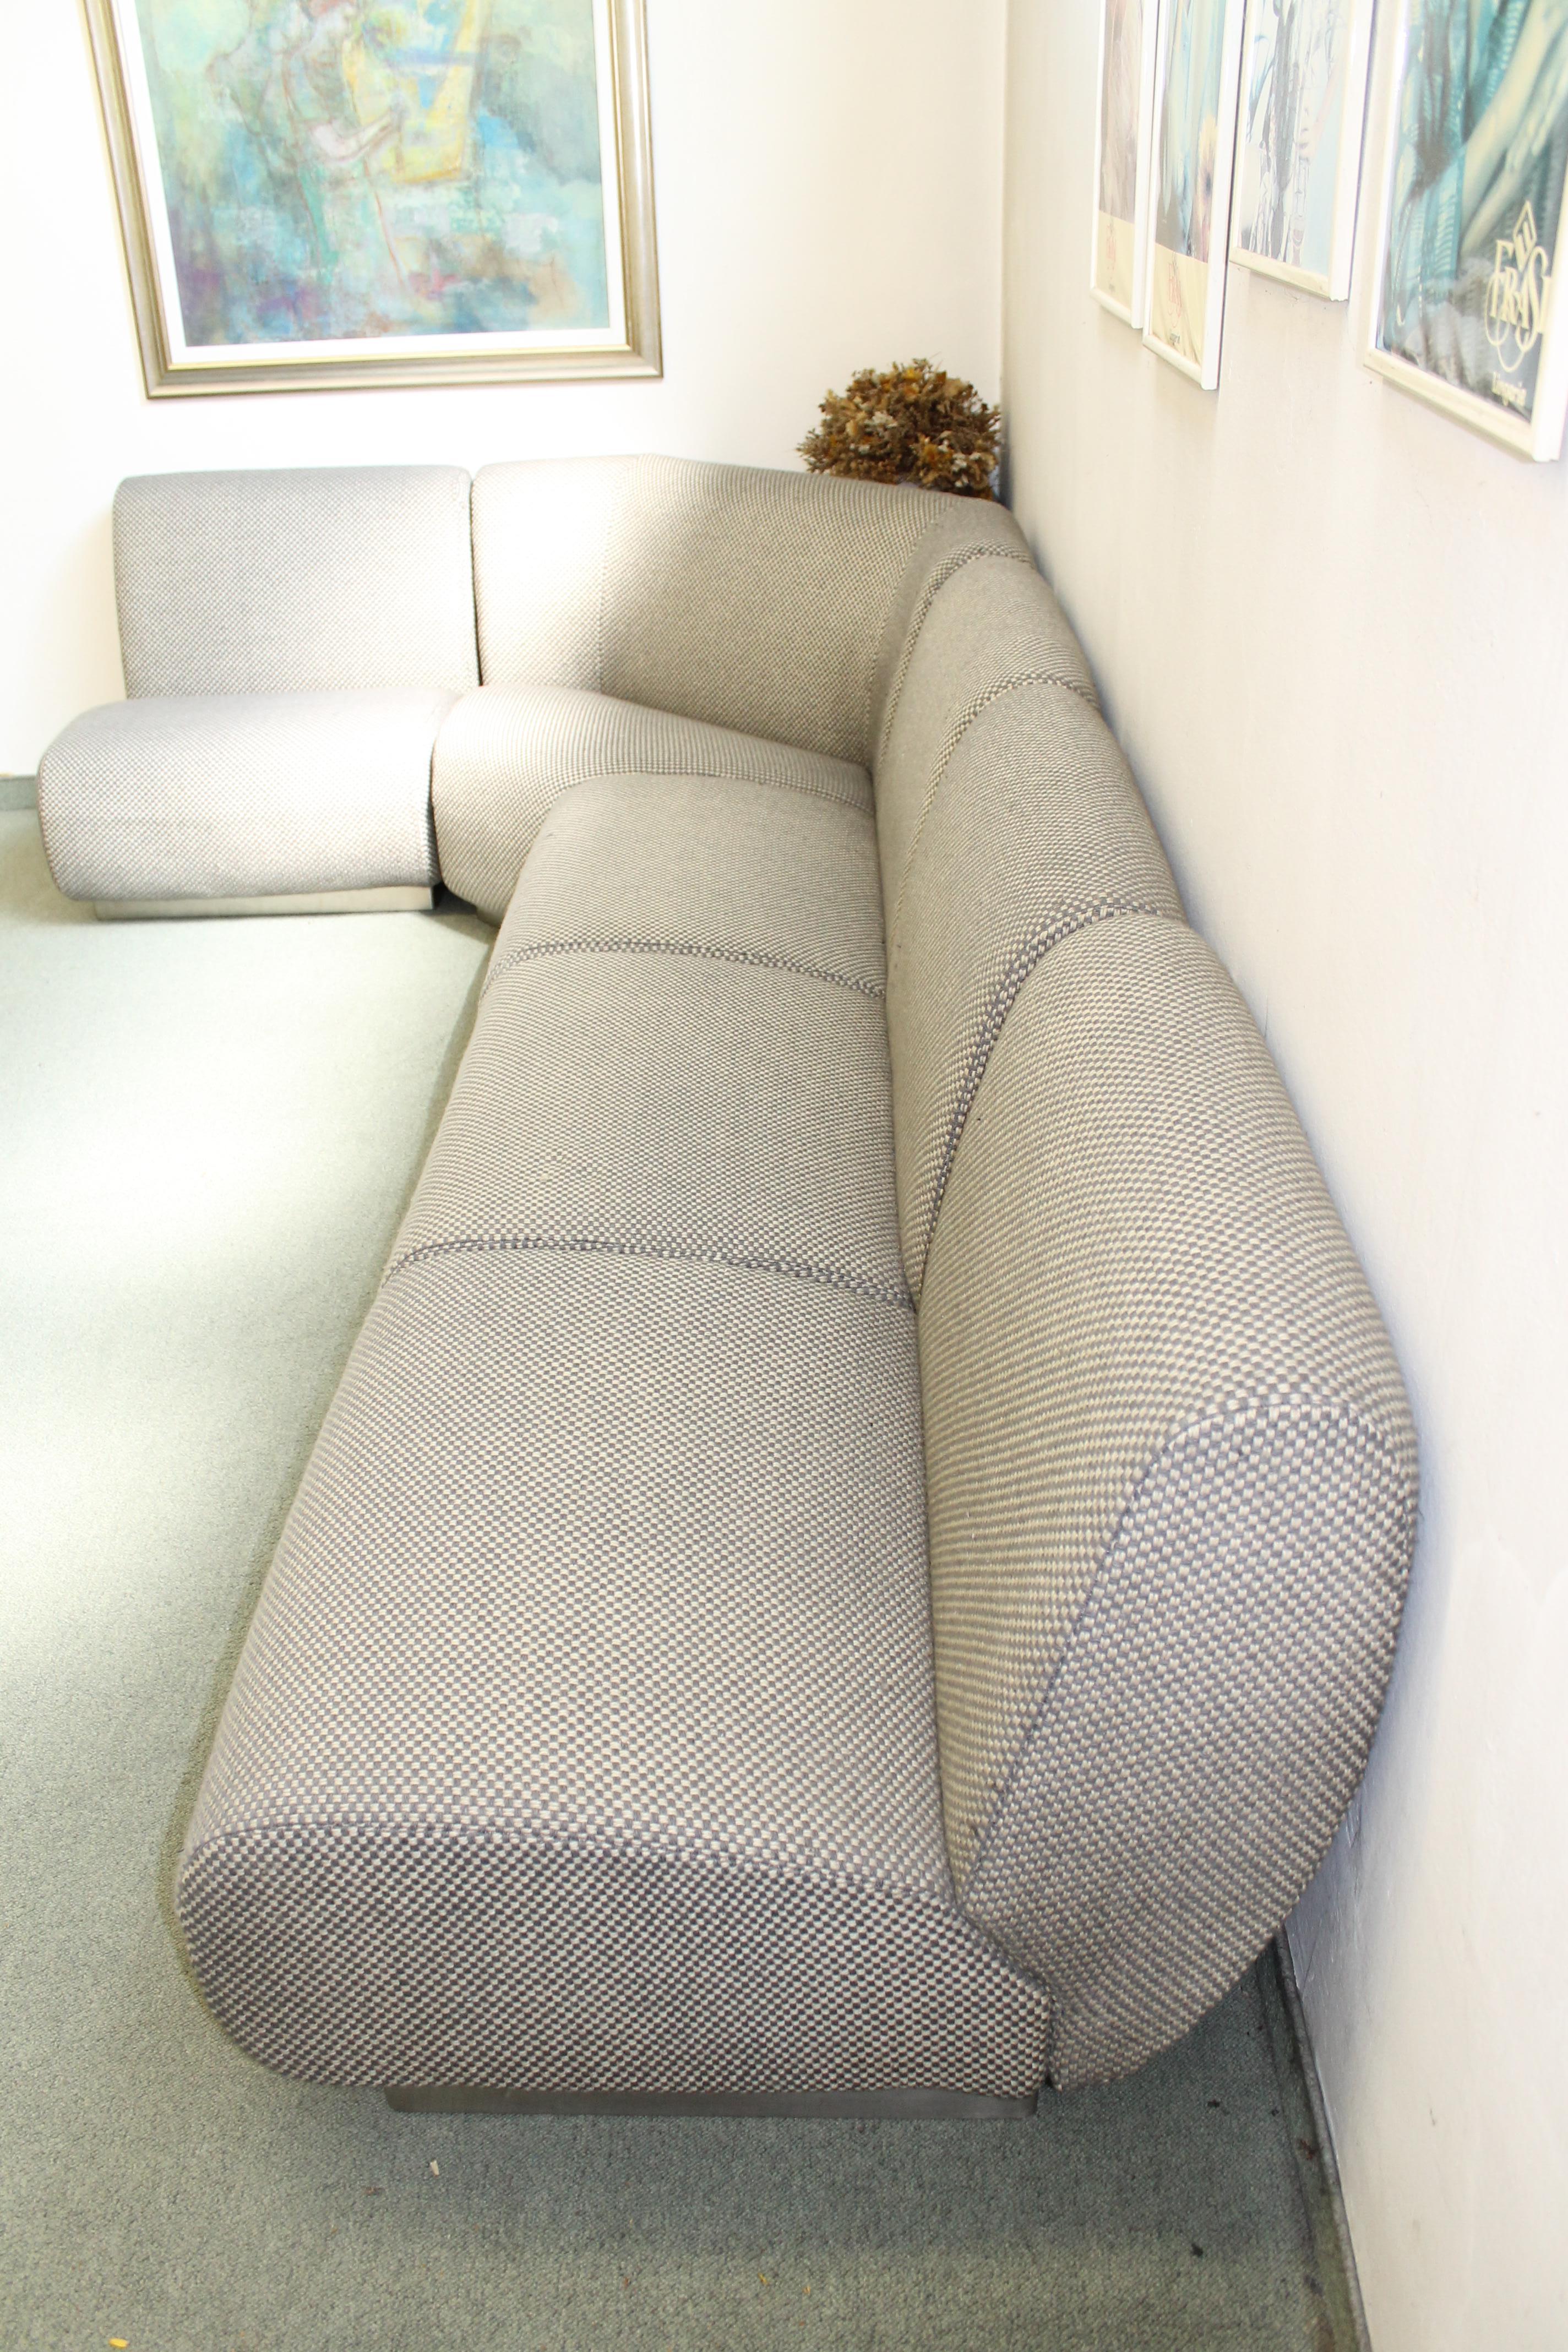 Sectional sofa designed by Gianni Moscatelli for Formanova, white-grey original wool fabric.

The three sectional seats can be used either left or right.